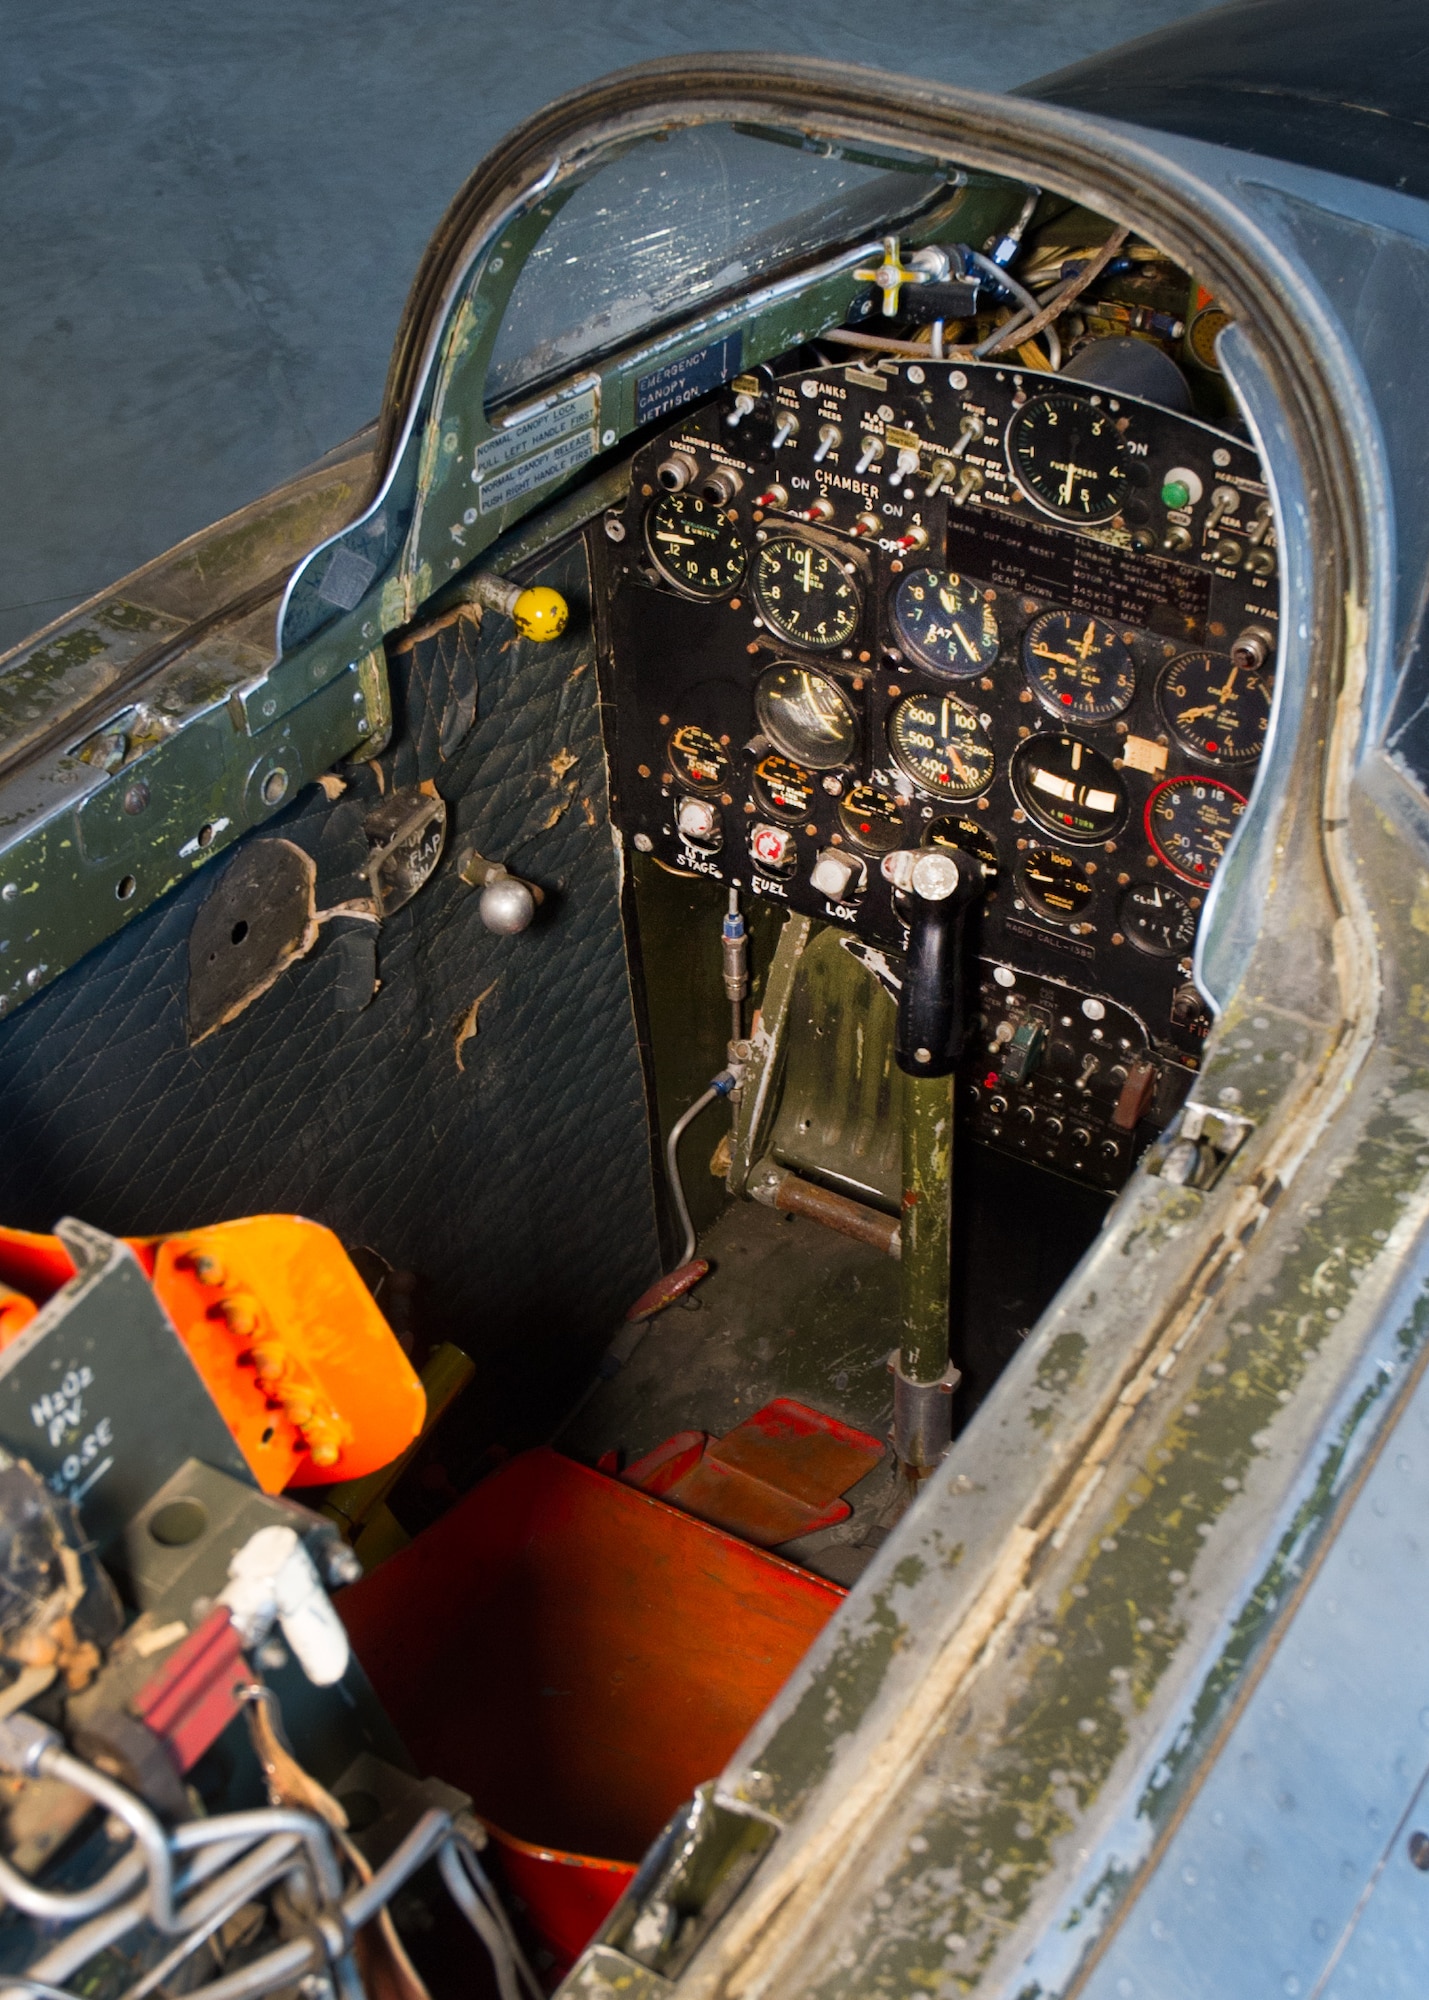 DAYTON, Ohio -- Bell X-1B cockpit view in the Research & Development Gallery at the National Museum of the United States Air Force. (U.S. Air Force photo by Ken LaRock)